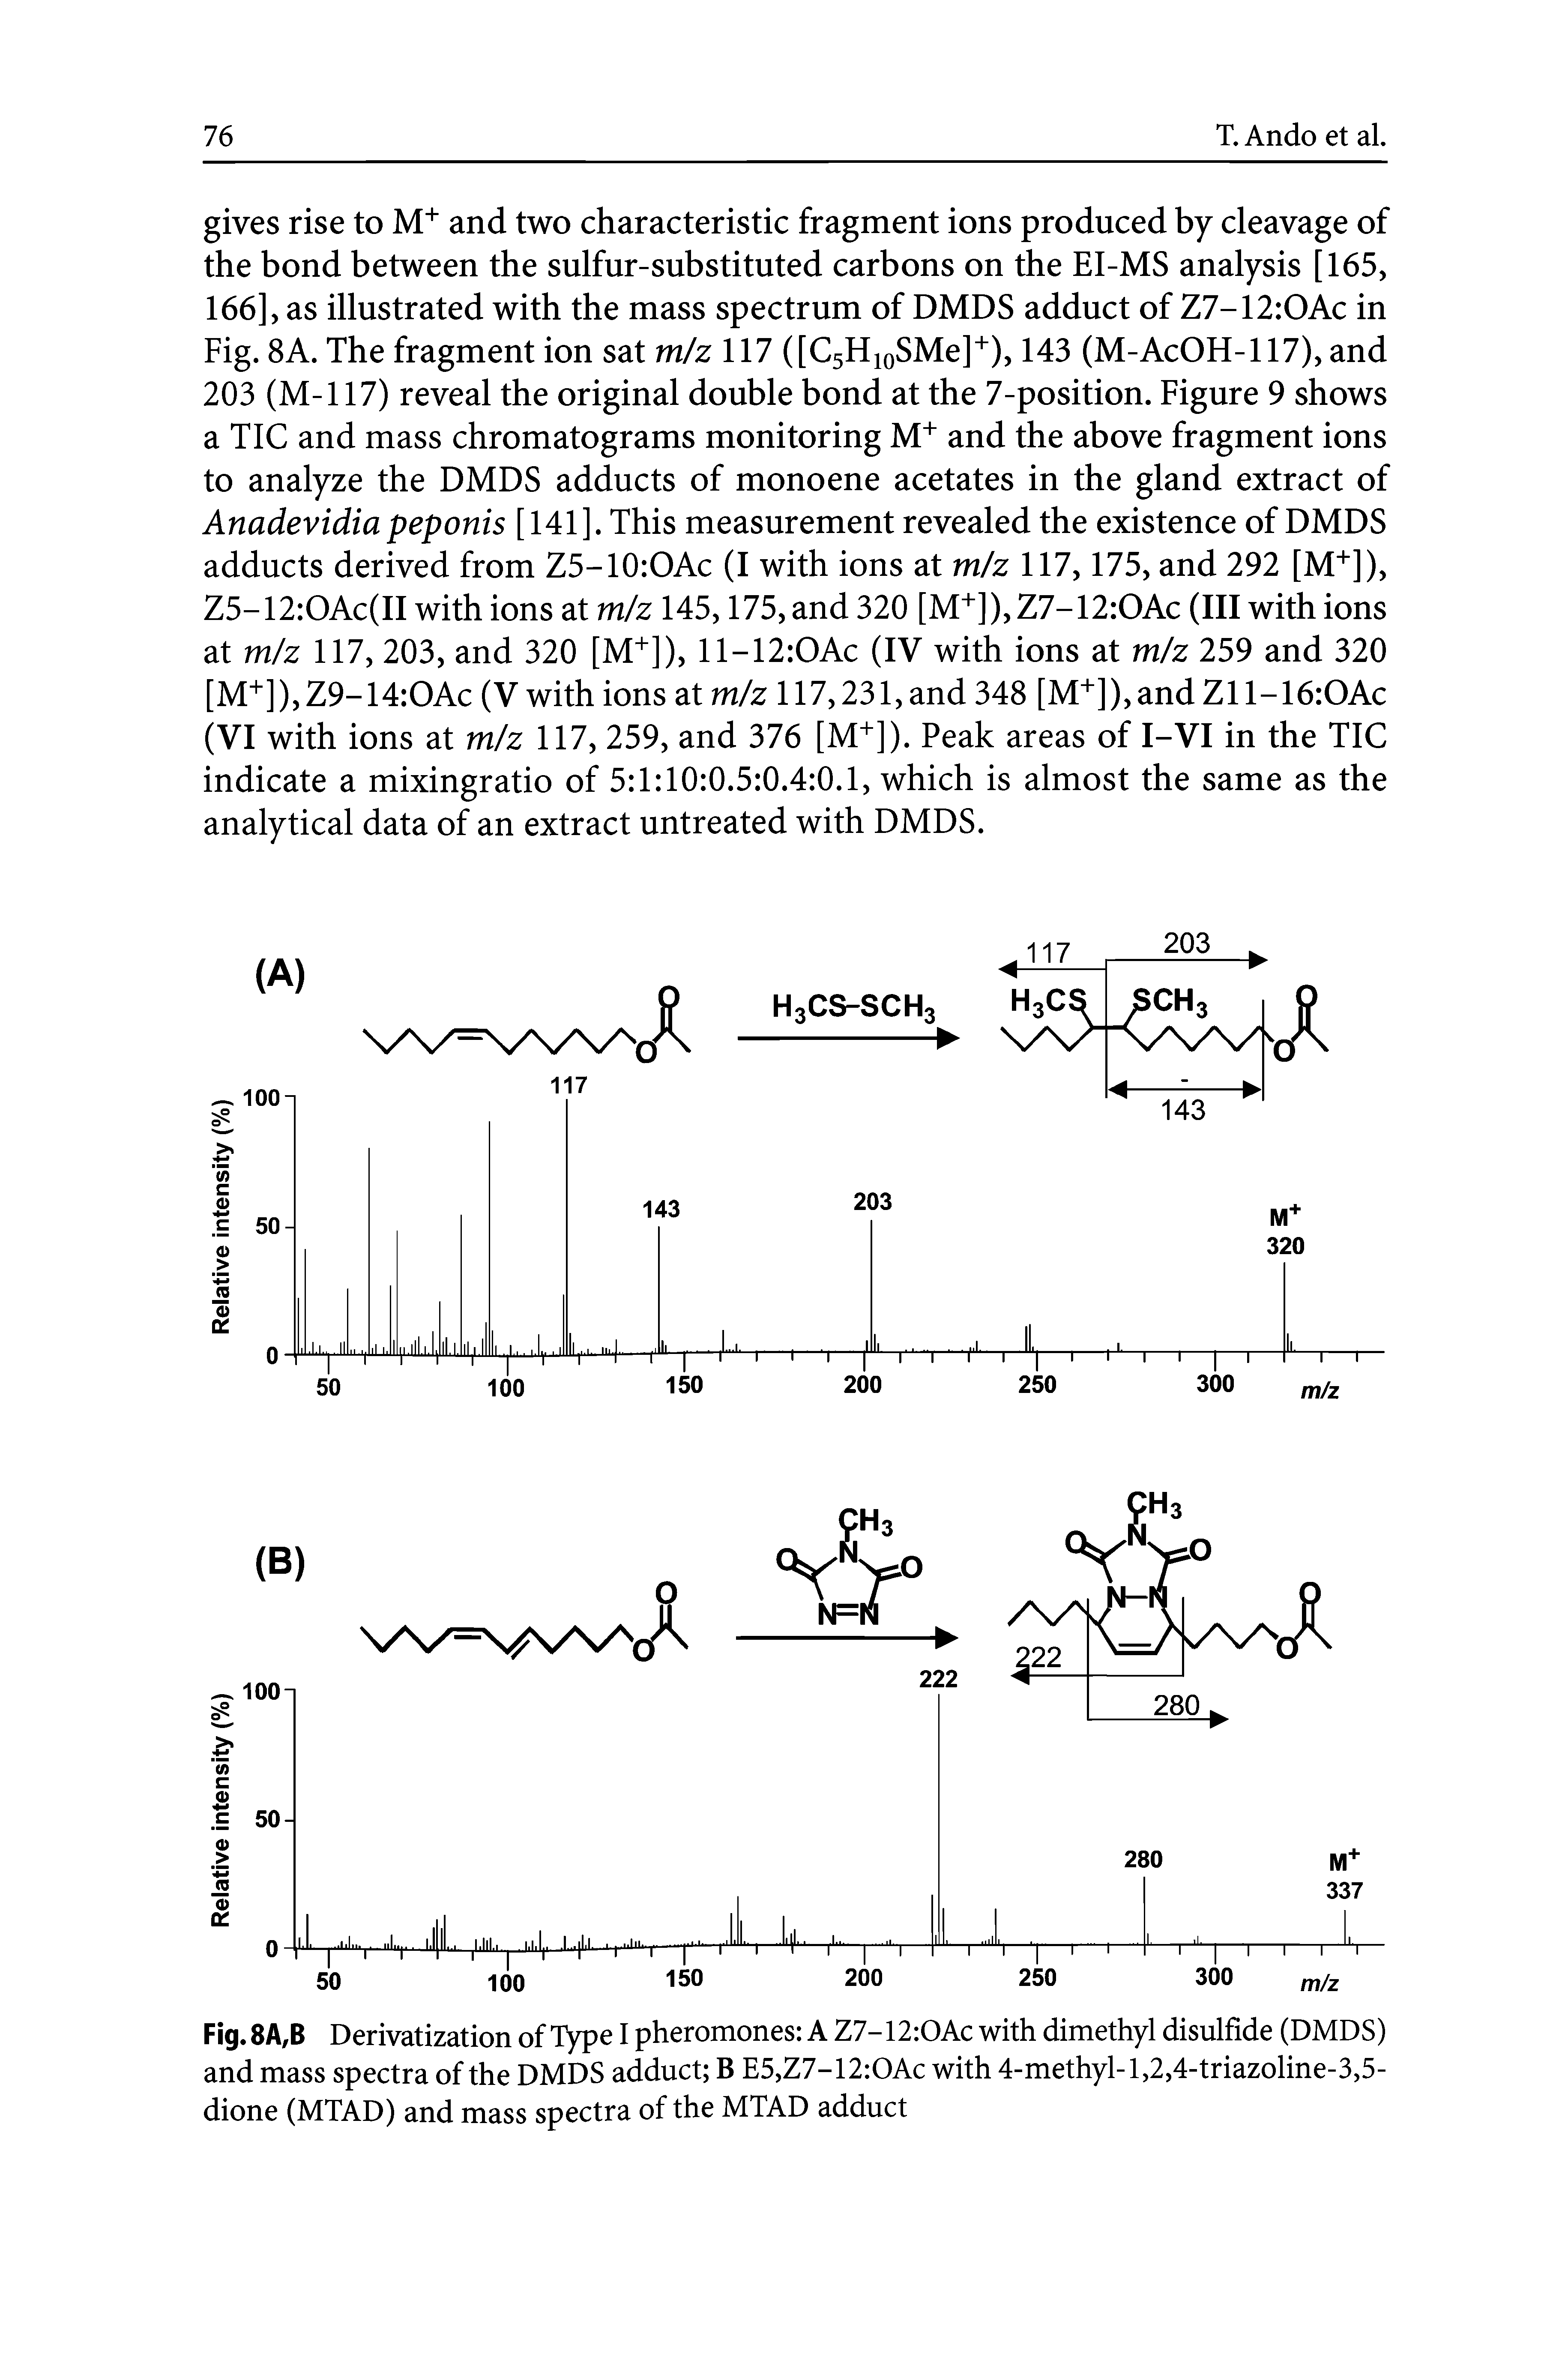 Fig.8A,B Derivatization of Type I pheromones A Z7-12 OAc with dimethyl disulfide (DMDS) and mass spectra of the DMDS adduct B E5,Z7-12 OAc with 4-methyl-1,2,4-triazoline-3,5-dione (MTAD) and mass spectra of the MTAD adduct...